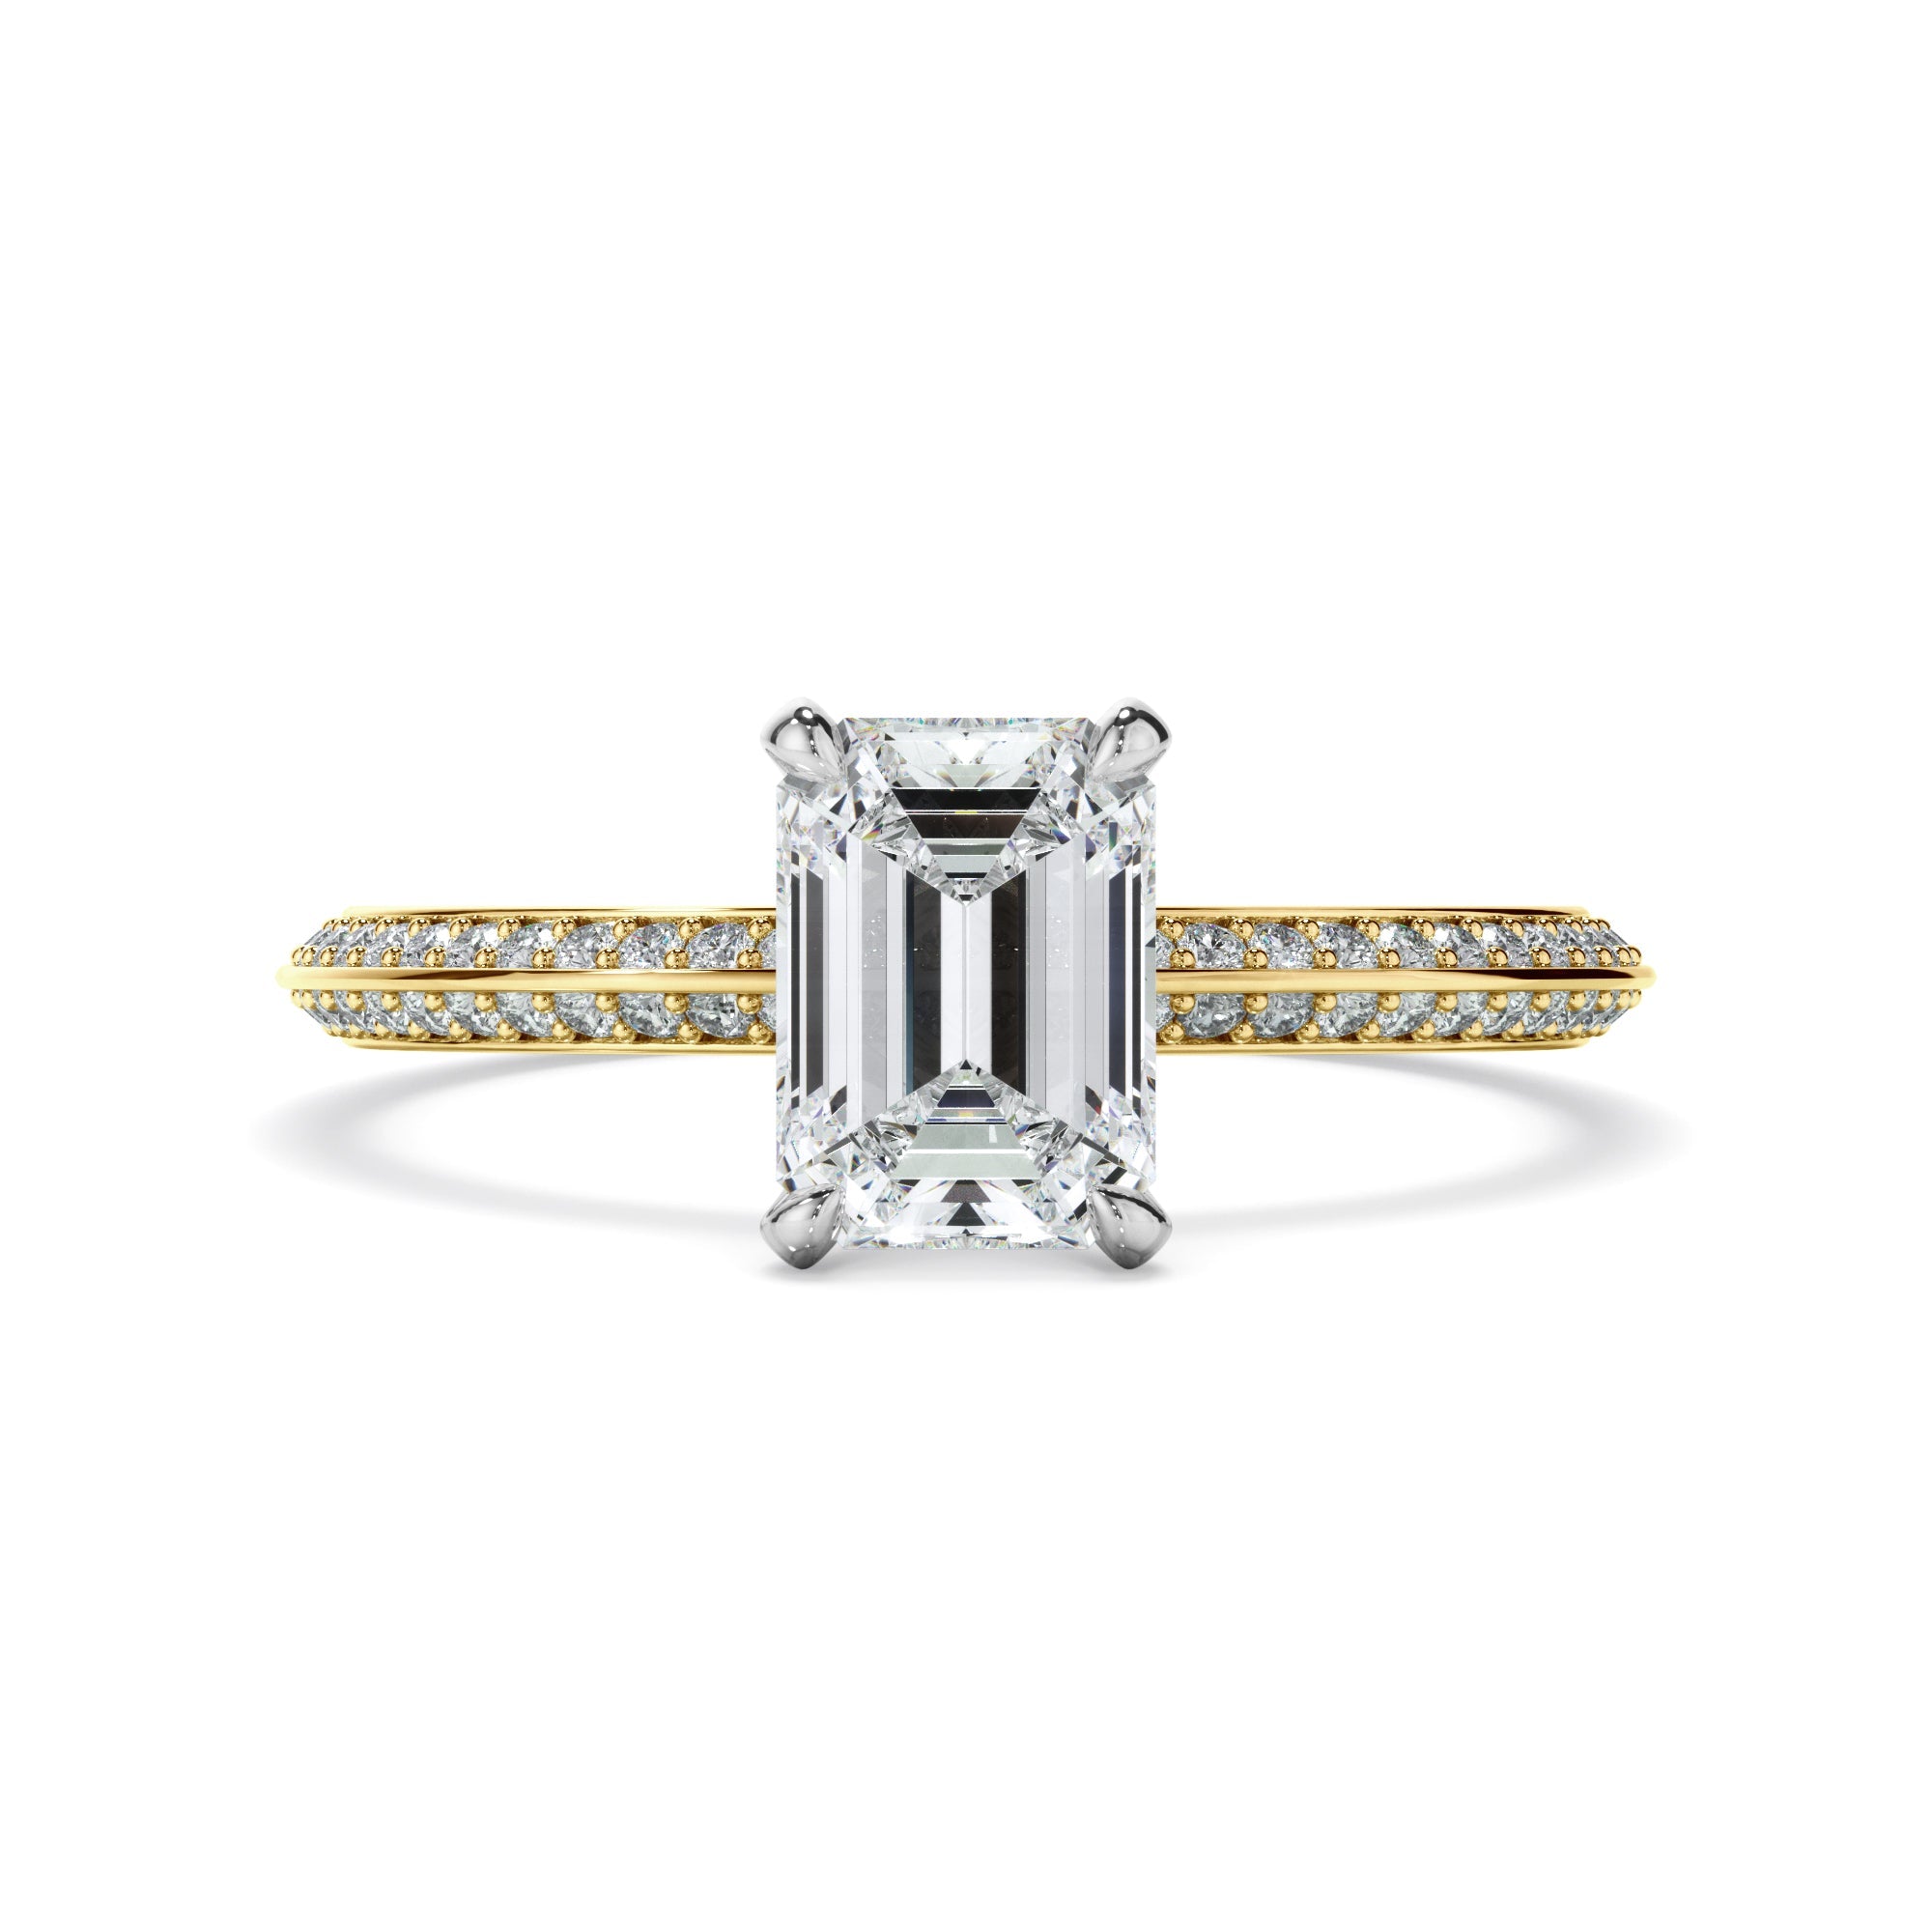 Emerald Cut Diamond Knife Edge Engagement Ring With Diamond Pave Sides